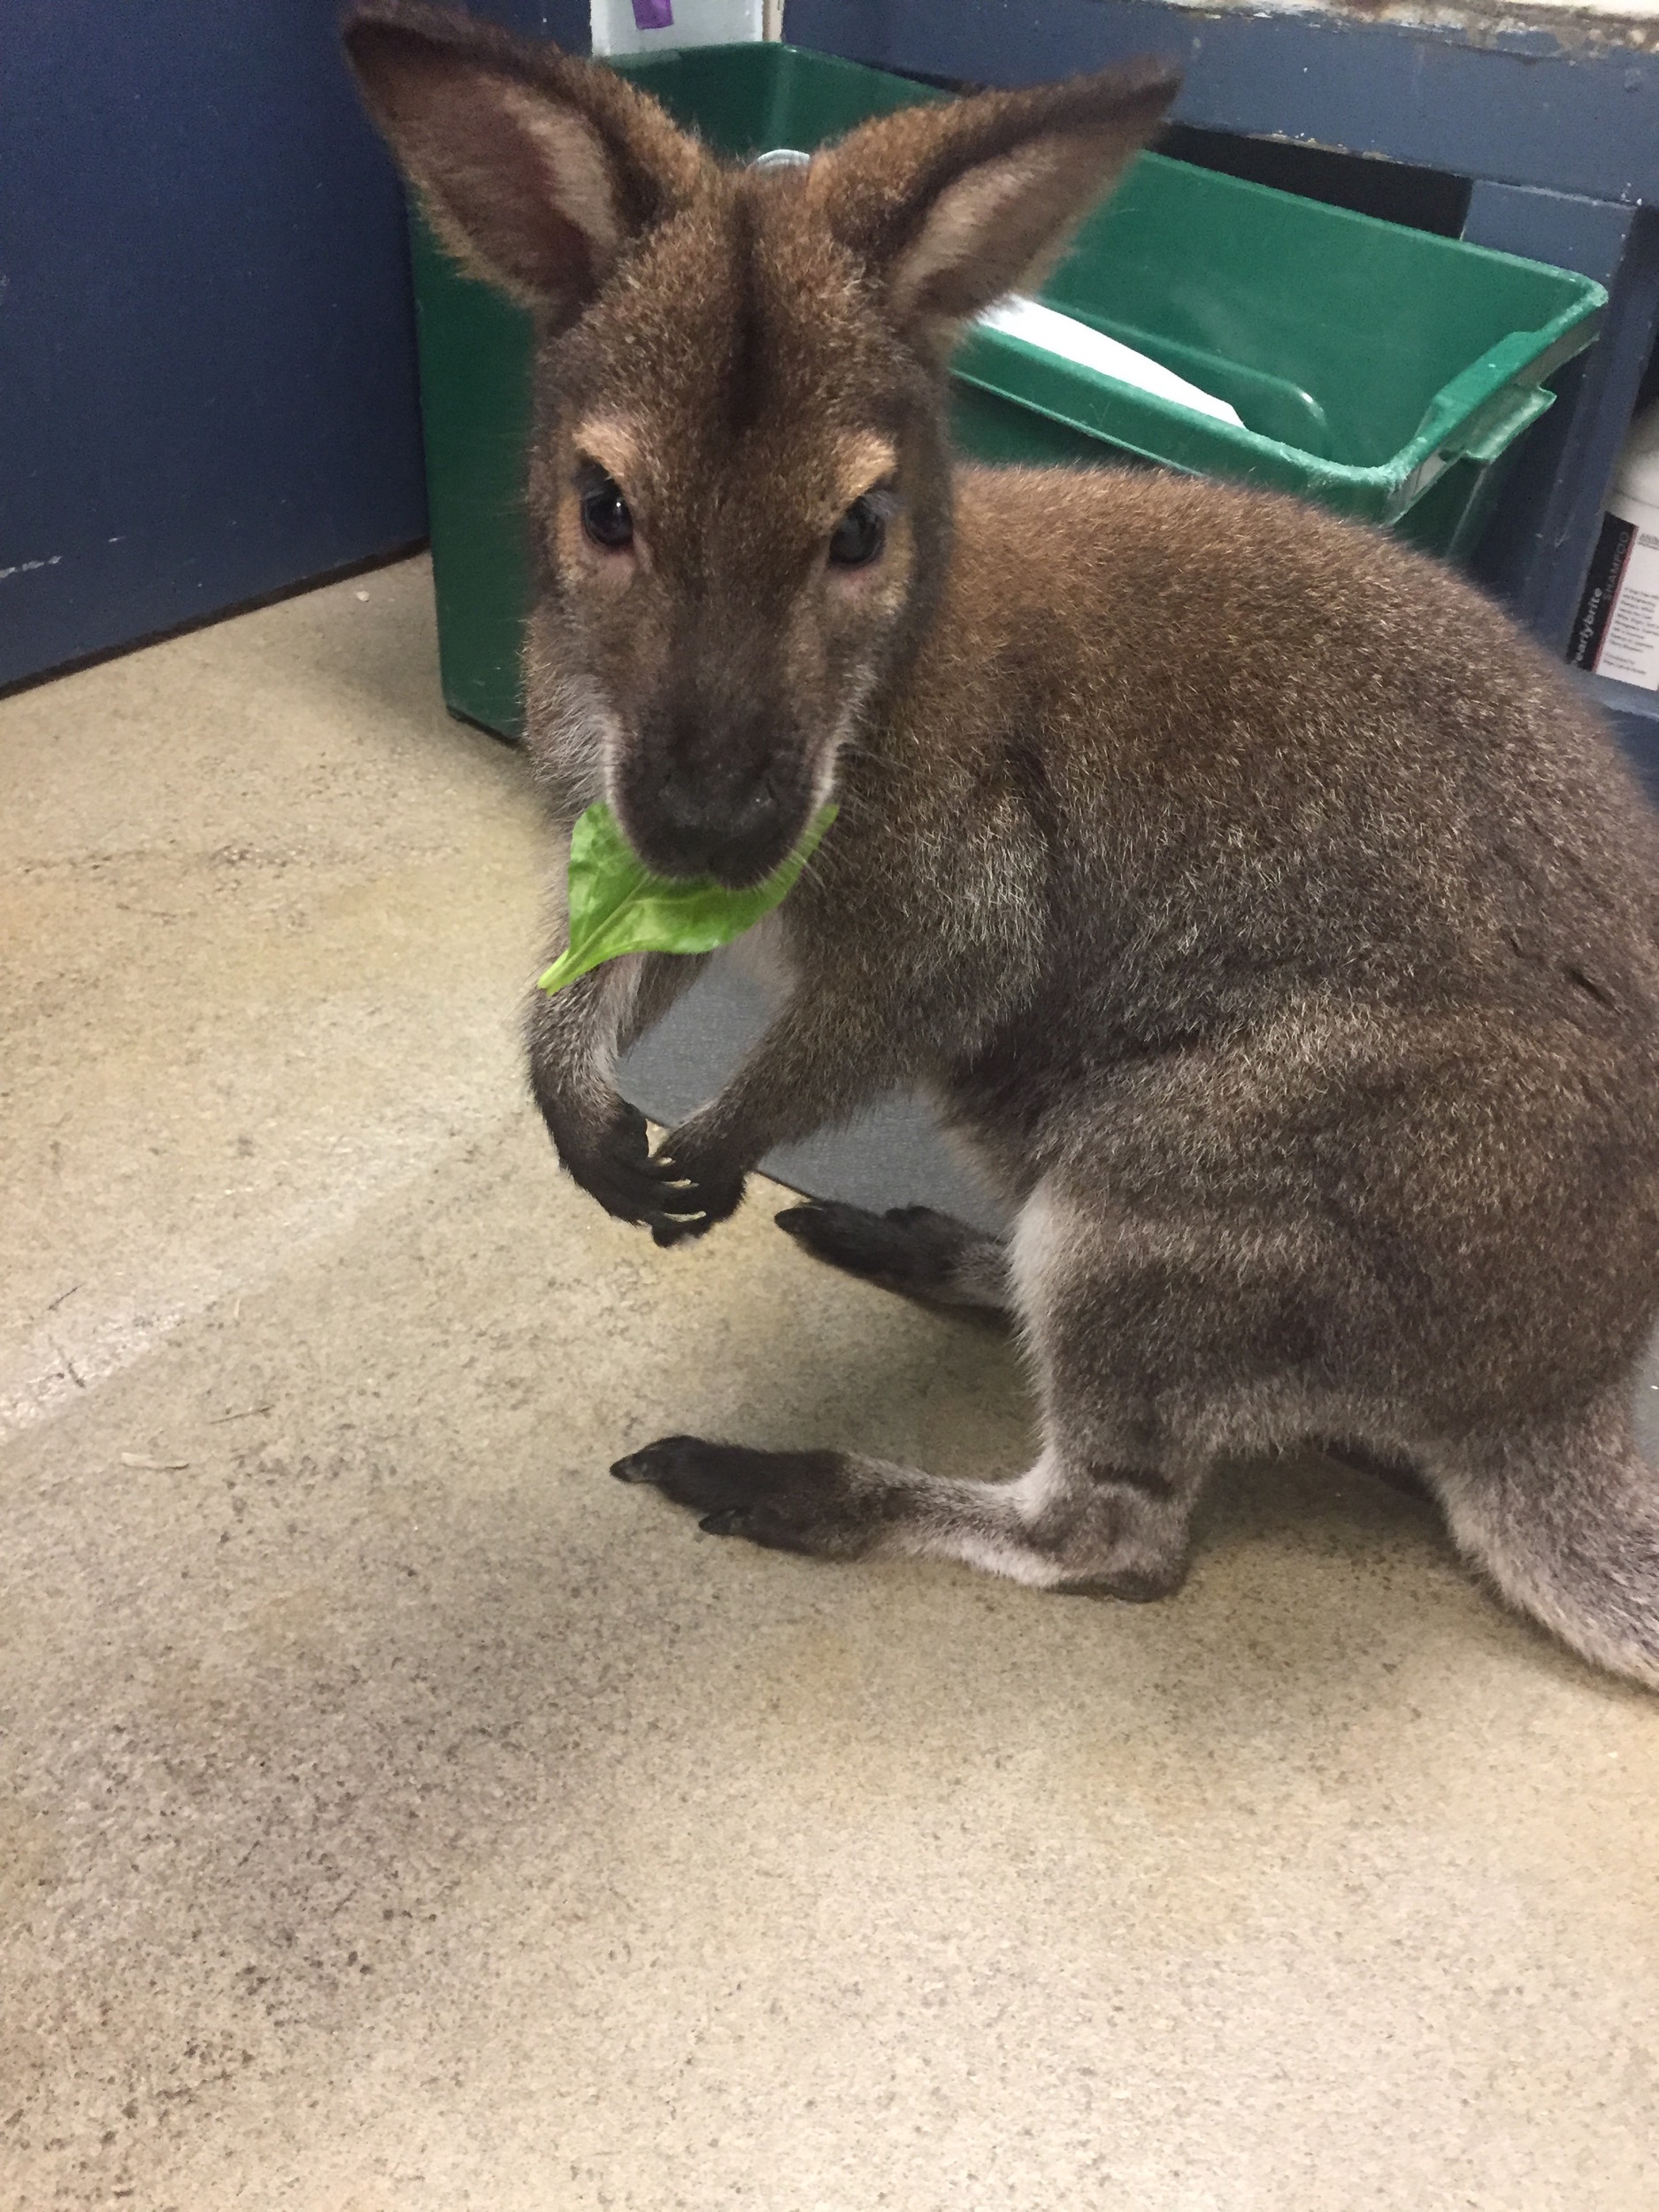 A wallaby found starving in an East Rockaway garage has gained 2.5 pounds at the Mineola Animal Hospital, where he was admitted on Jan. 31.